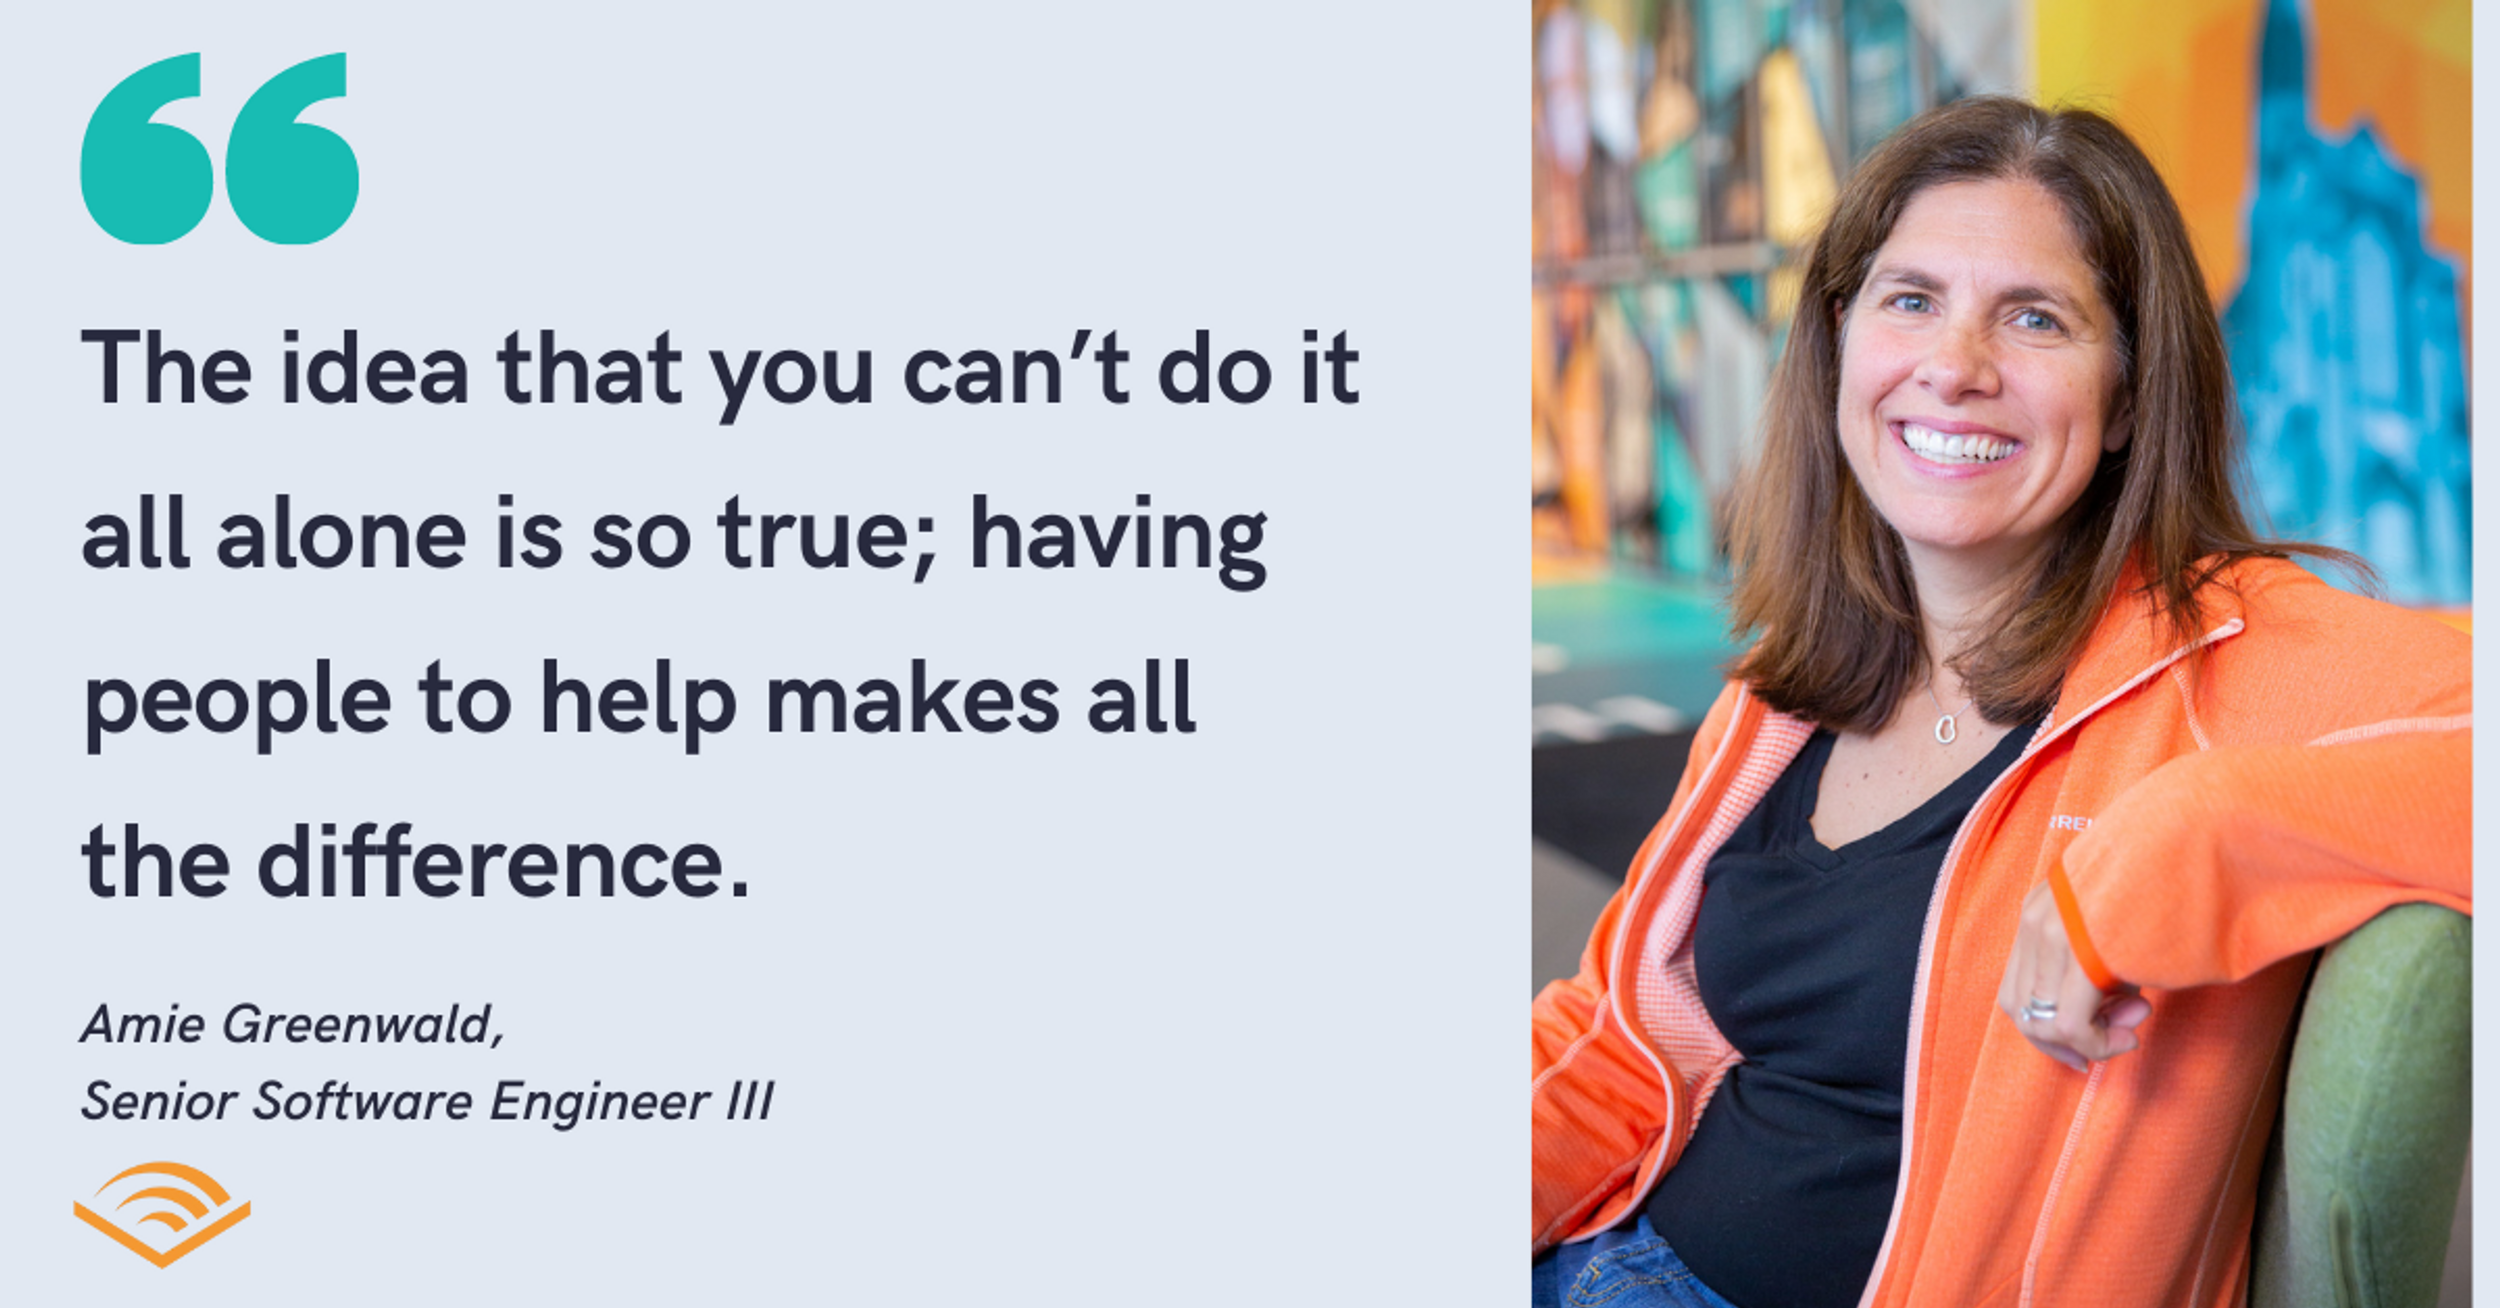 Blog post header with quote from Amie Greenwald, Senior Software Engineer III at Audible